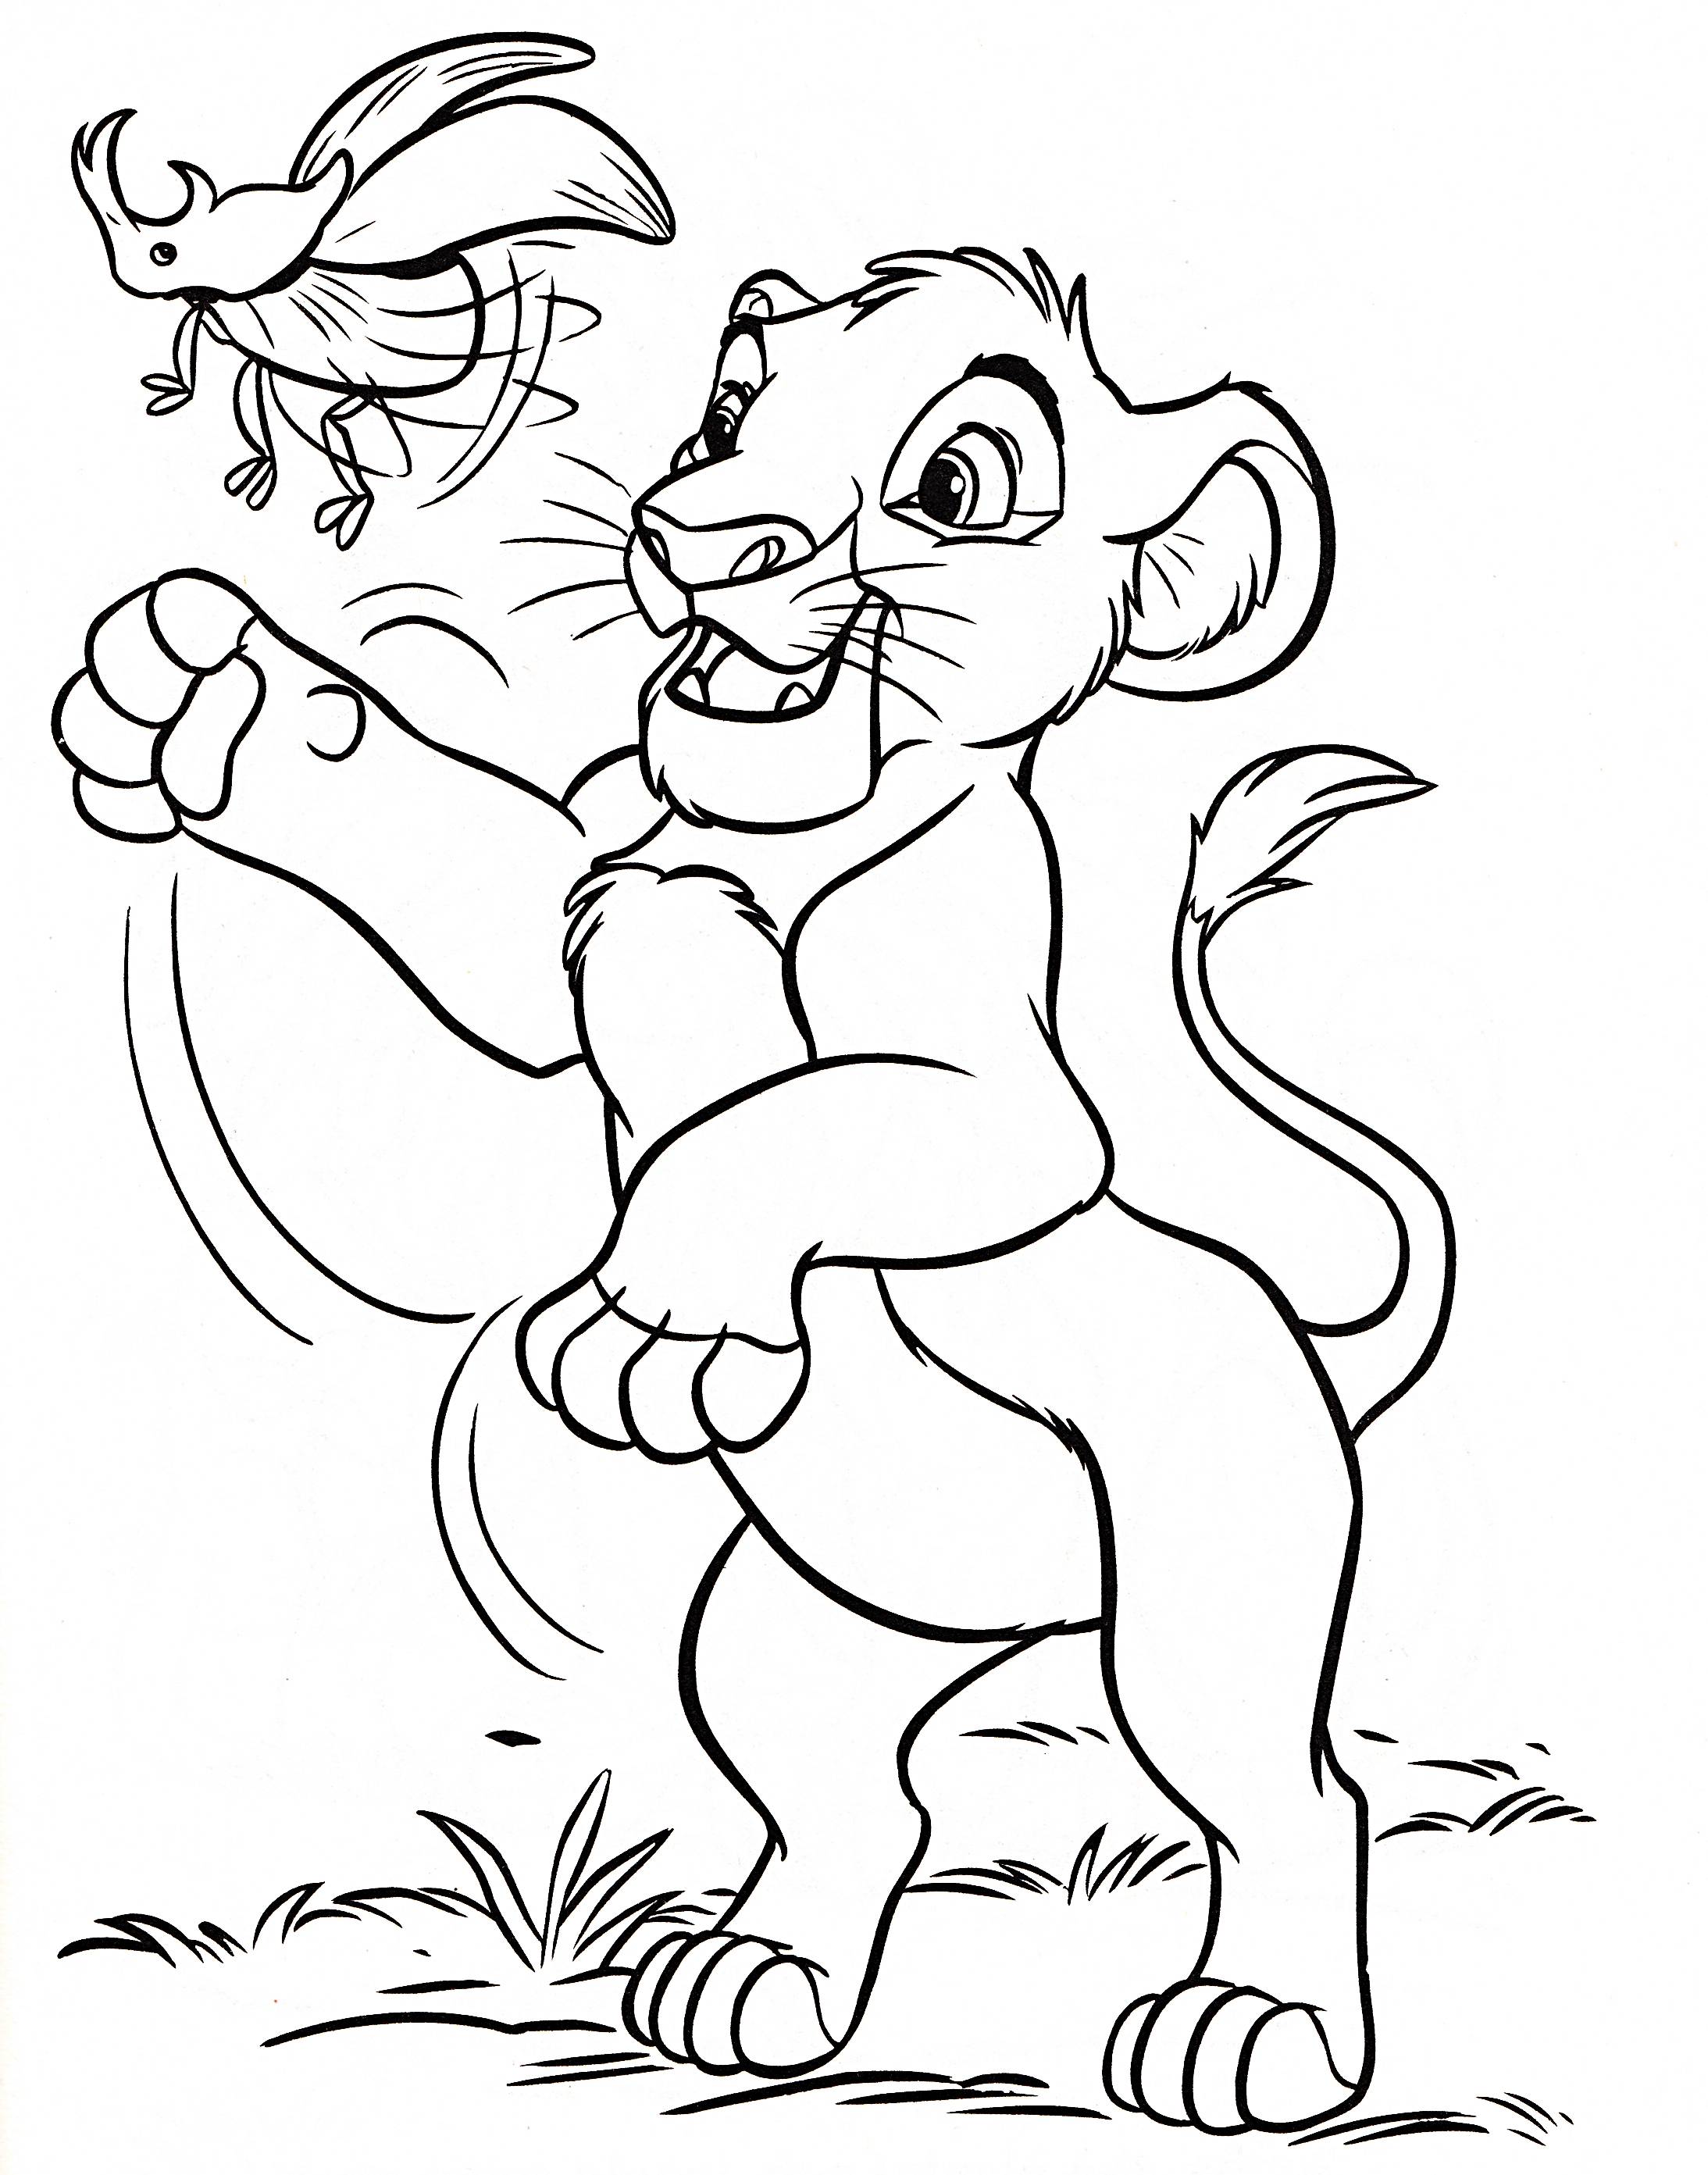 Lion King Holding Up Simba Coloring Page - Coloring Home